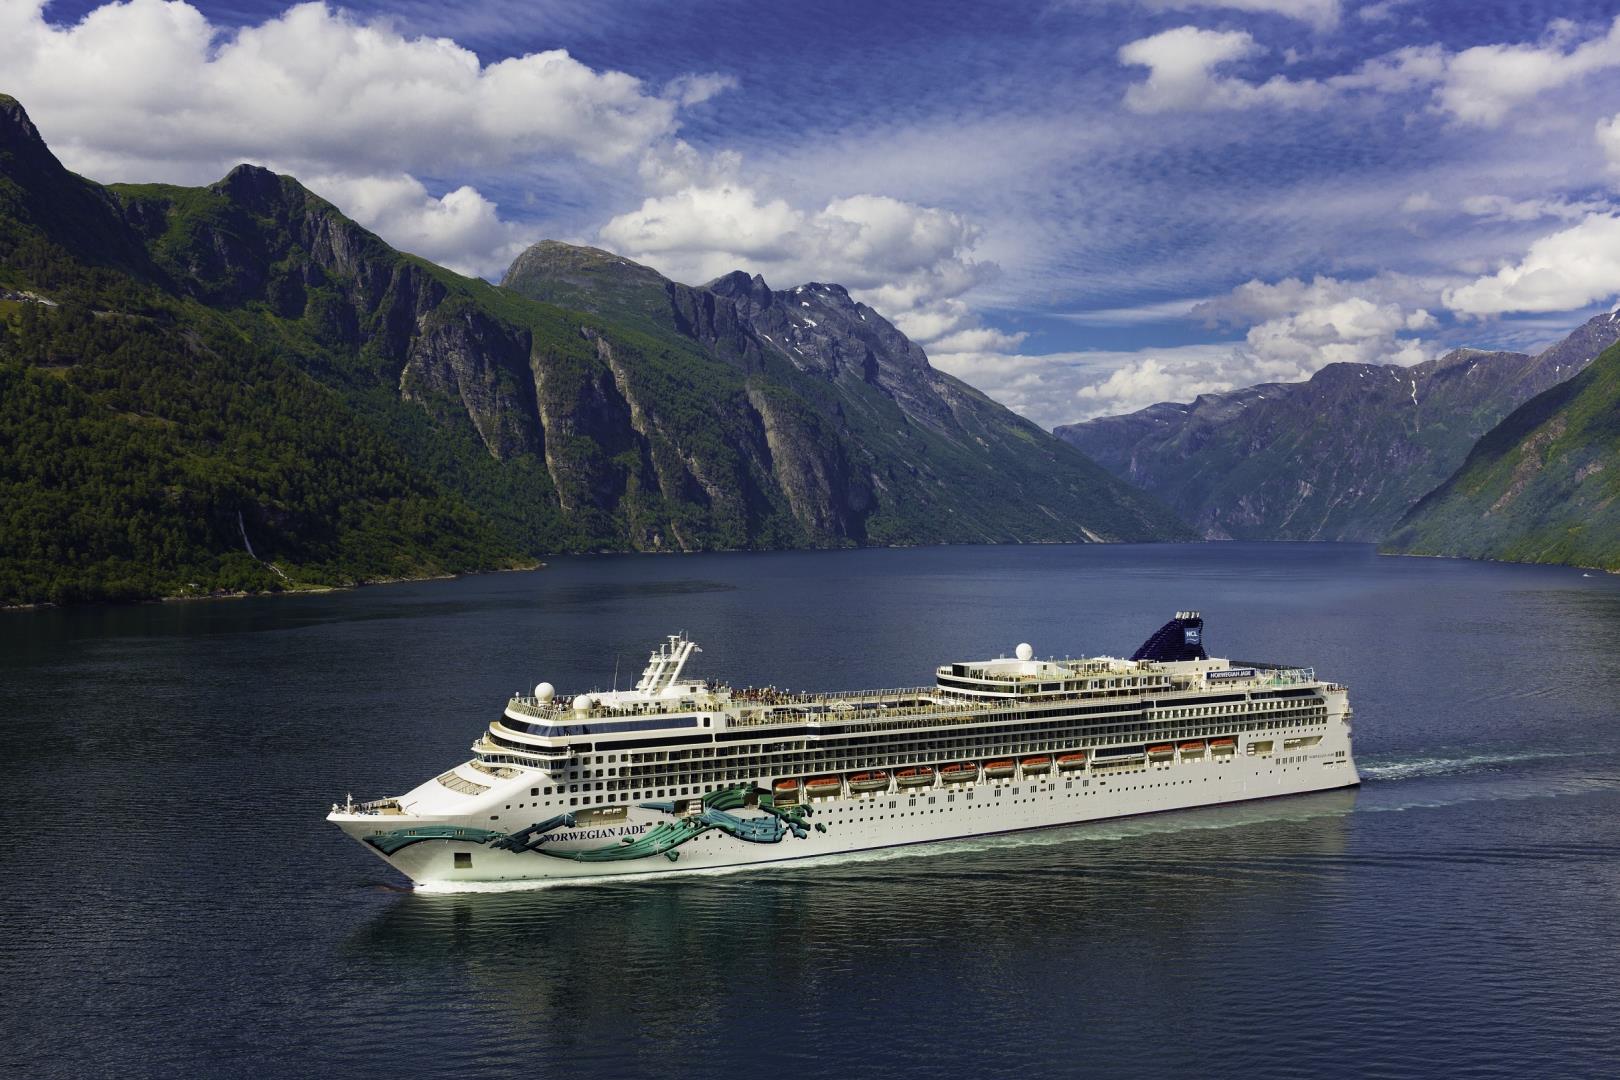 14-day Cruise to from San Diego, California on Norwegian Jade